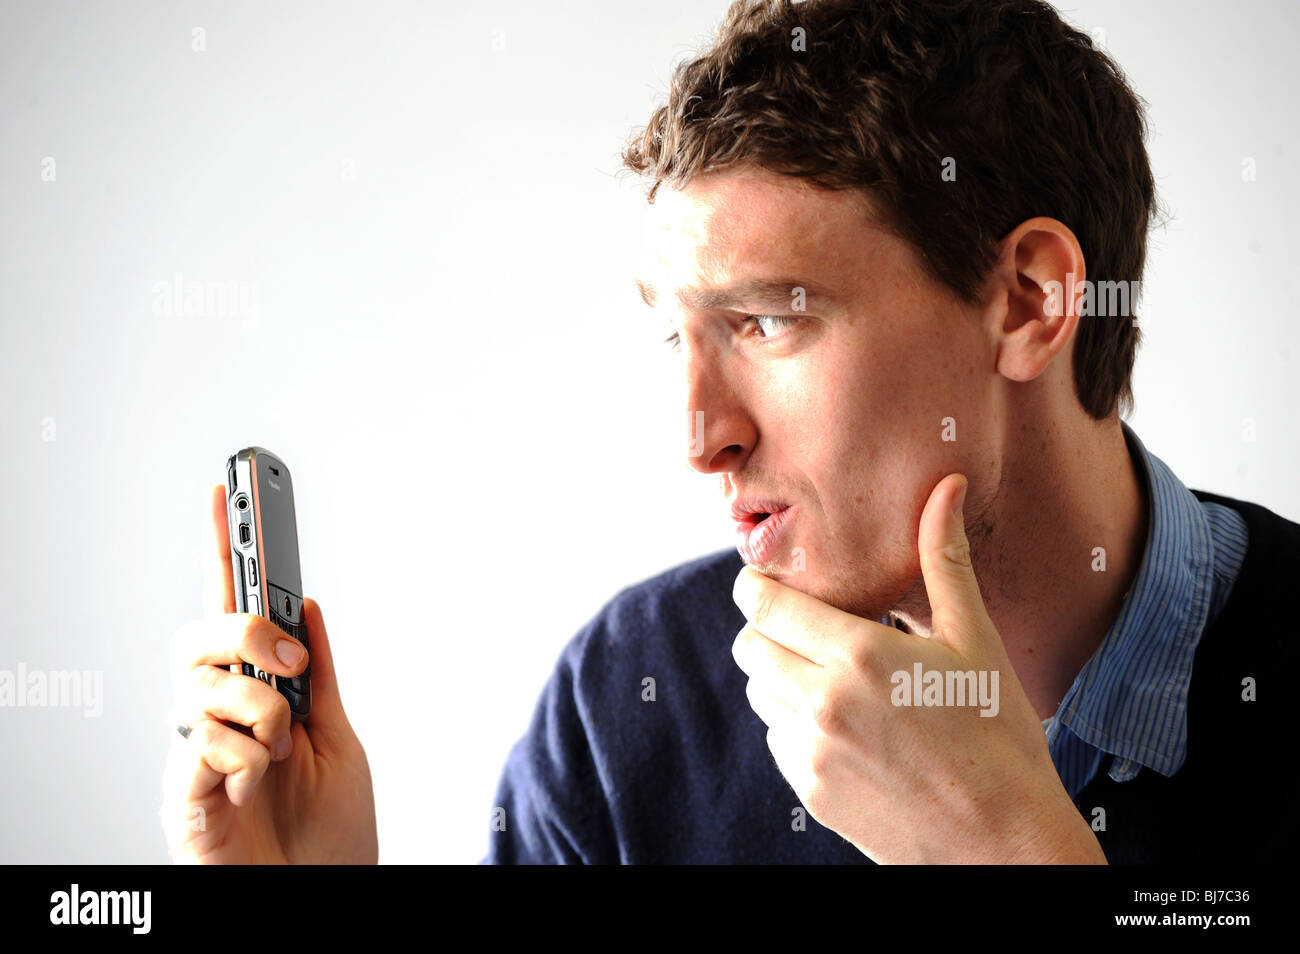 Young man in his twenties holding a Blackberry mobile telephone - posed by model Stock Photo